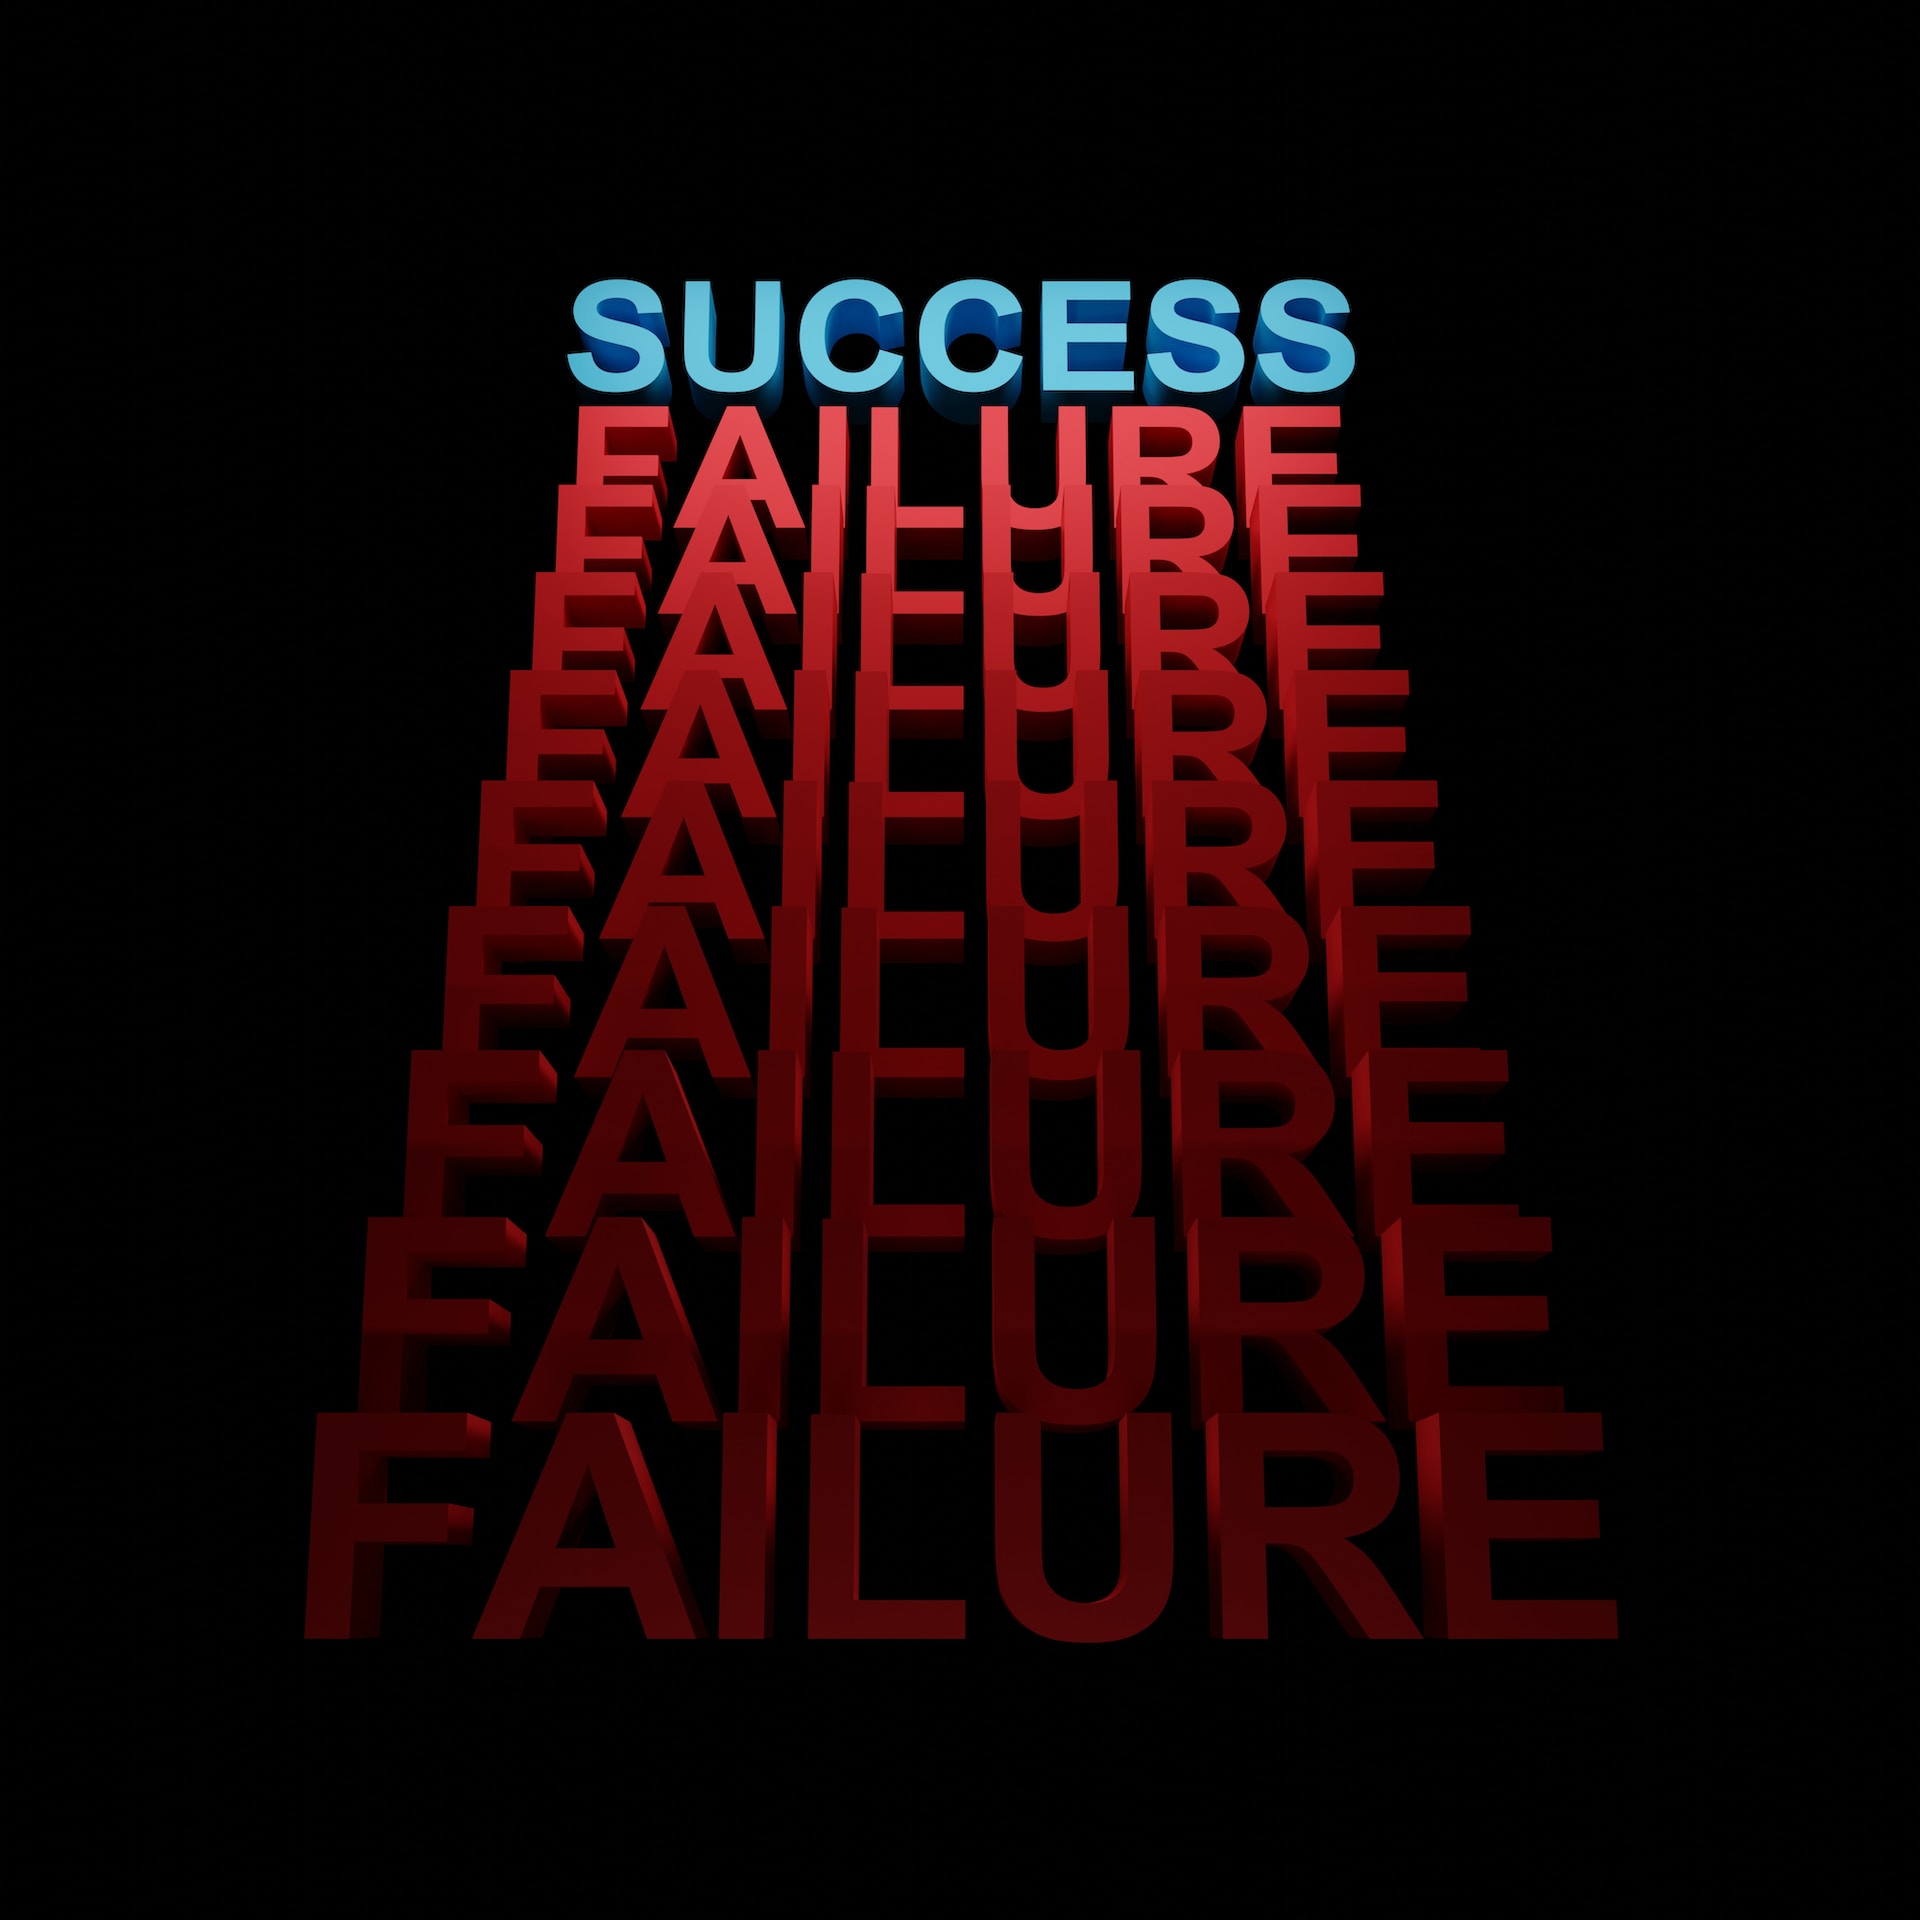 LEARNING FROM FAILURE AND GAINING SUCCESS IN BUSINESS